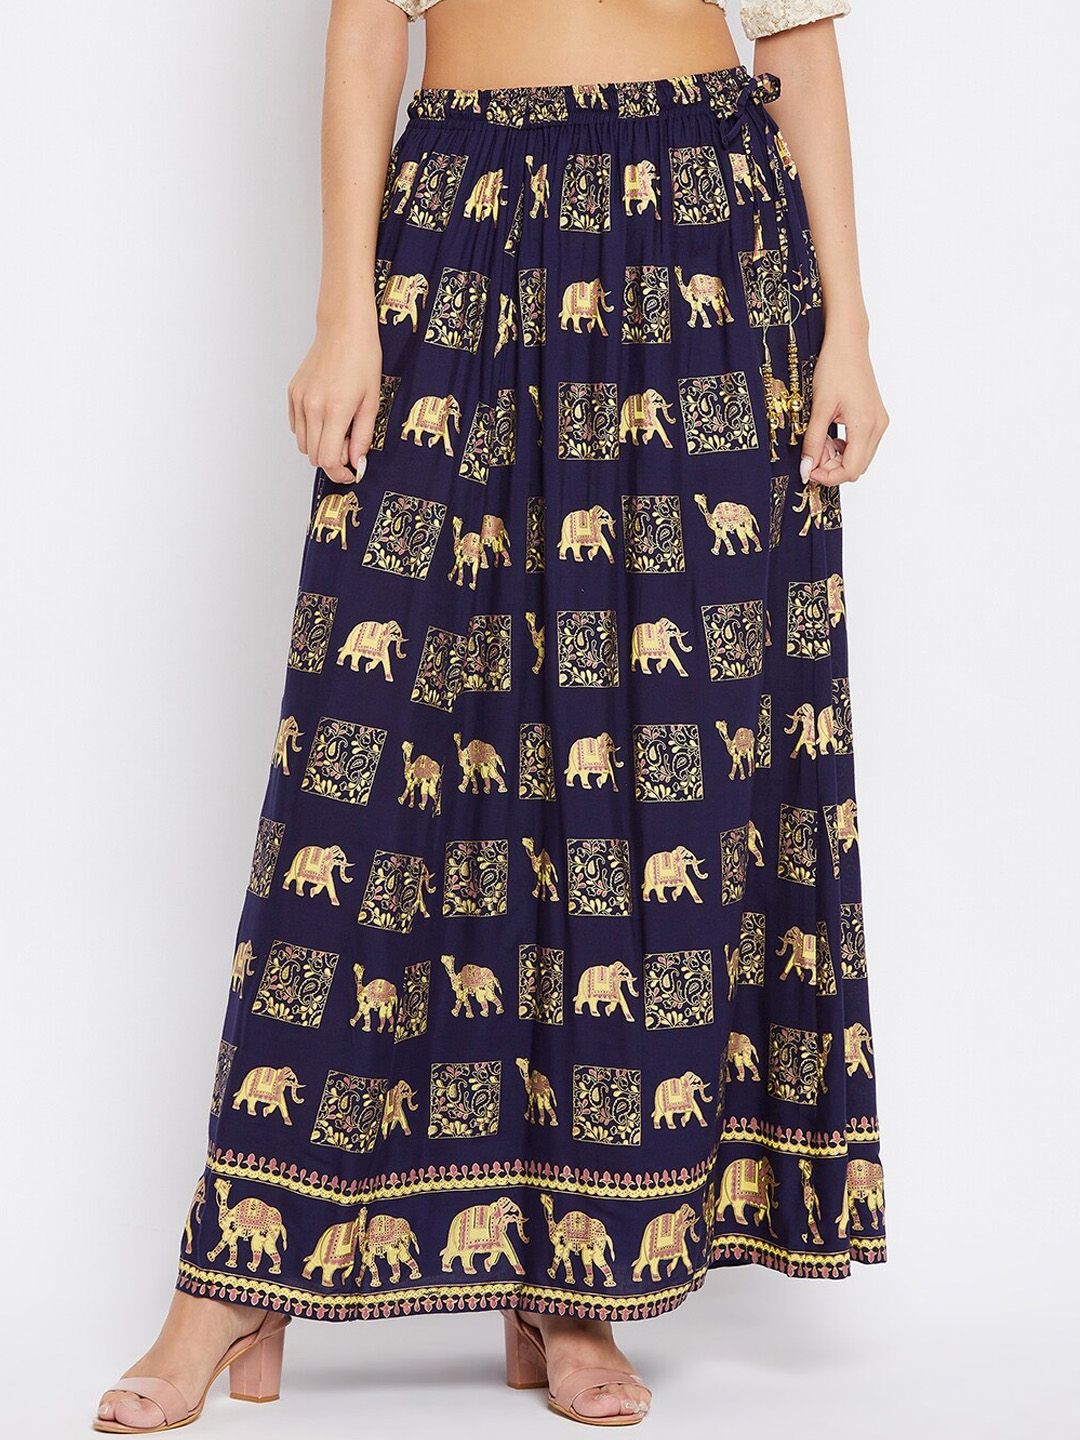 Clora Creation Ethnic Motifs Printed Flared Maxi Skirts Price in India